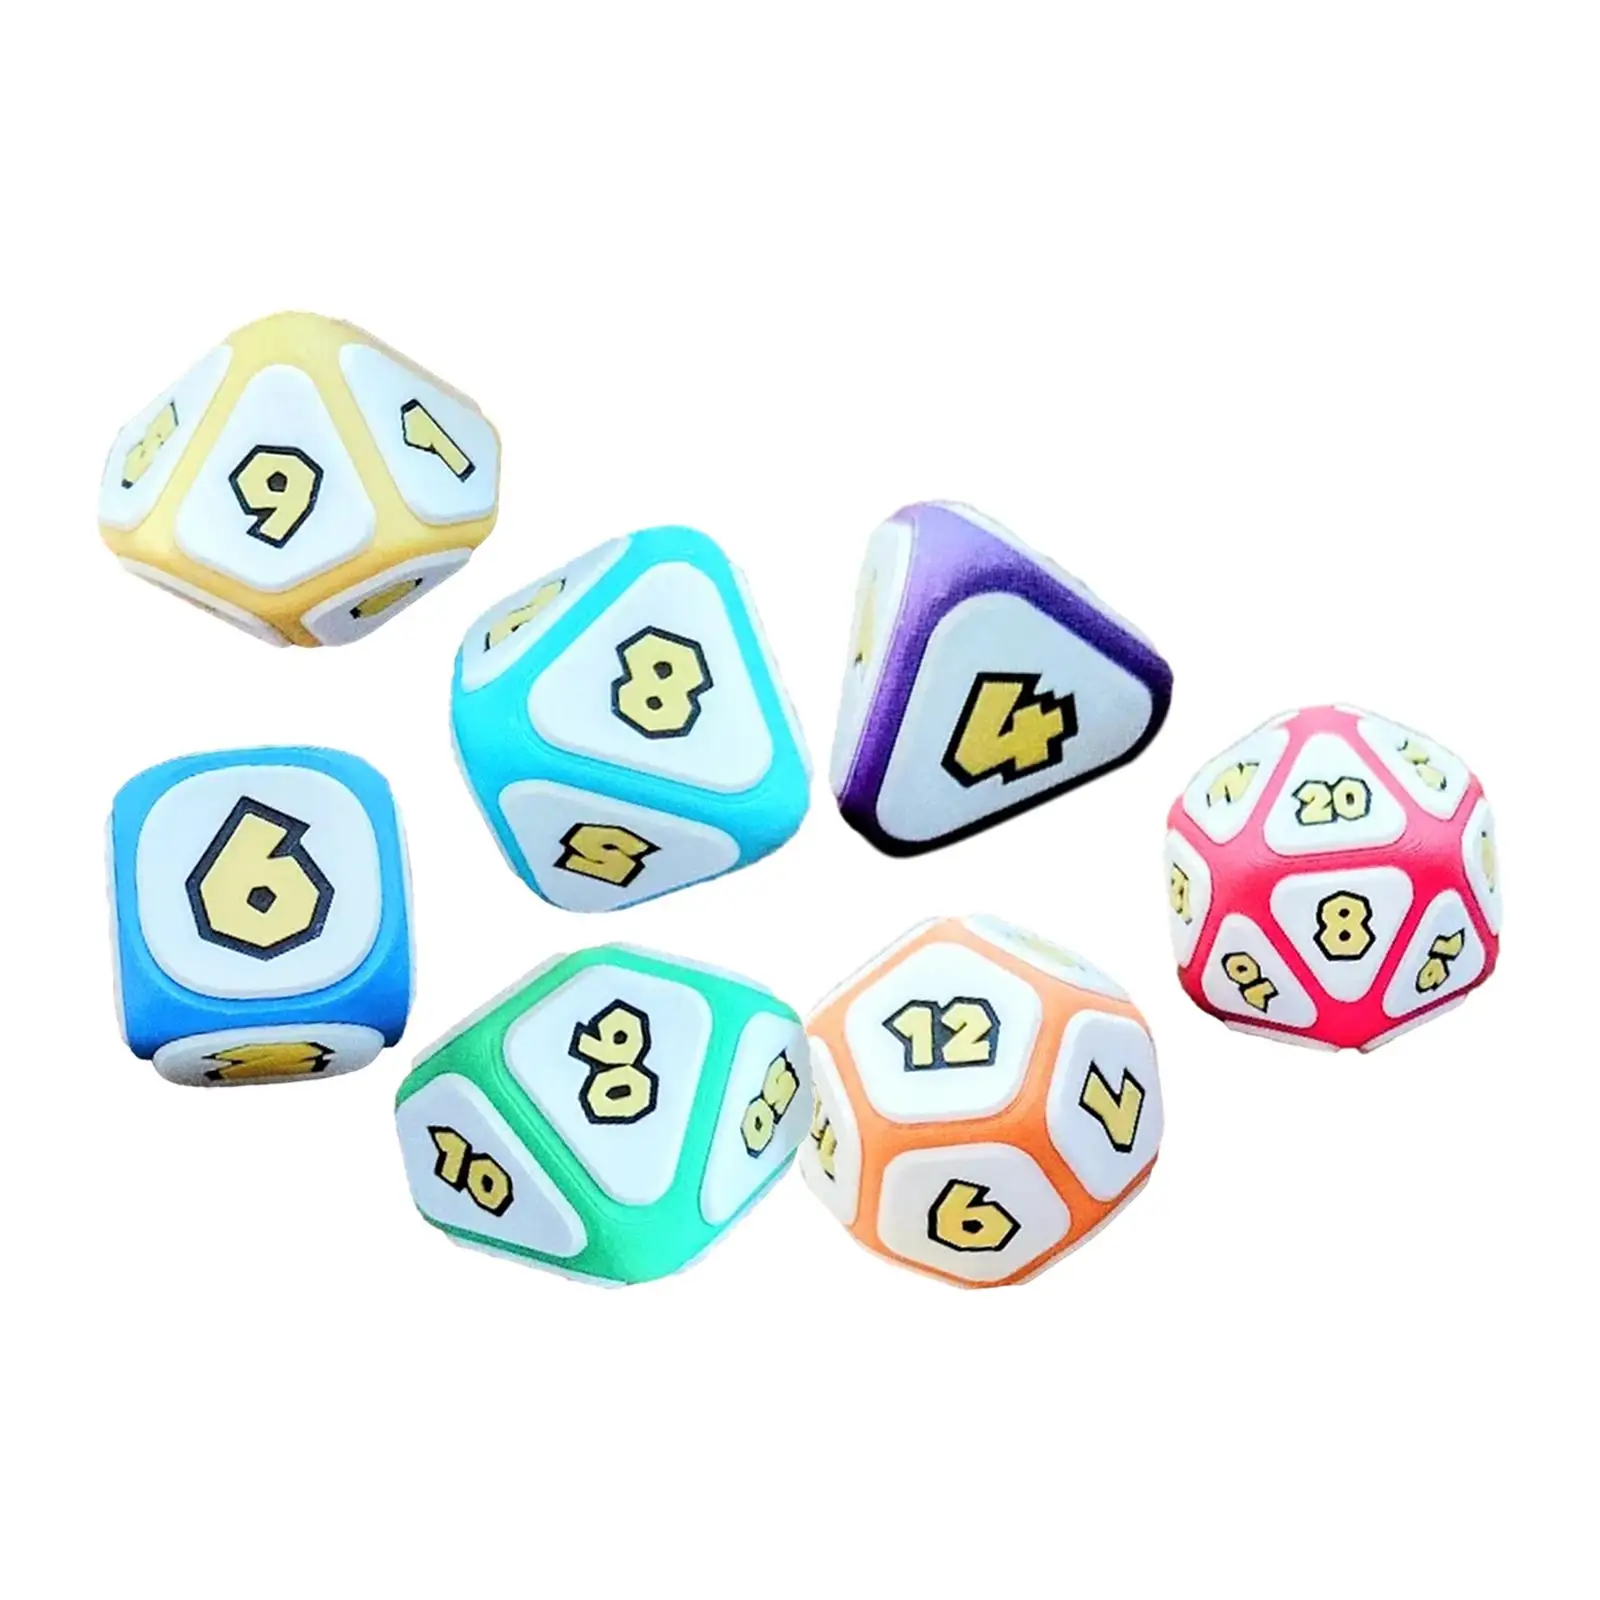 

7x D4 D8 D10 D12 D20 RPG Entertainment Toys Board Game Role Playing Card Games Polyhedral Dices Set PVC Dices Multi Sided Dices